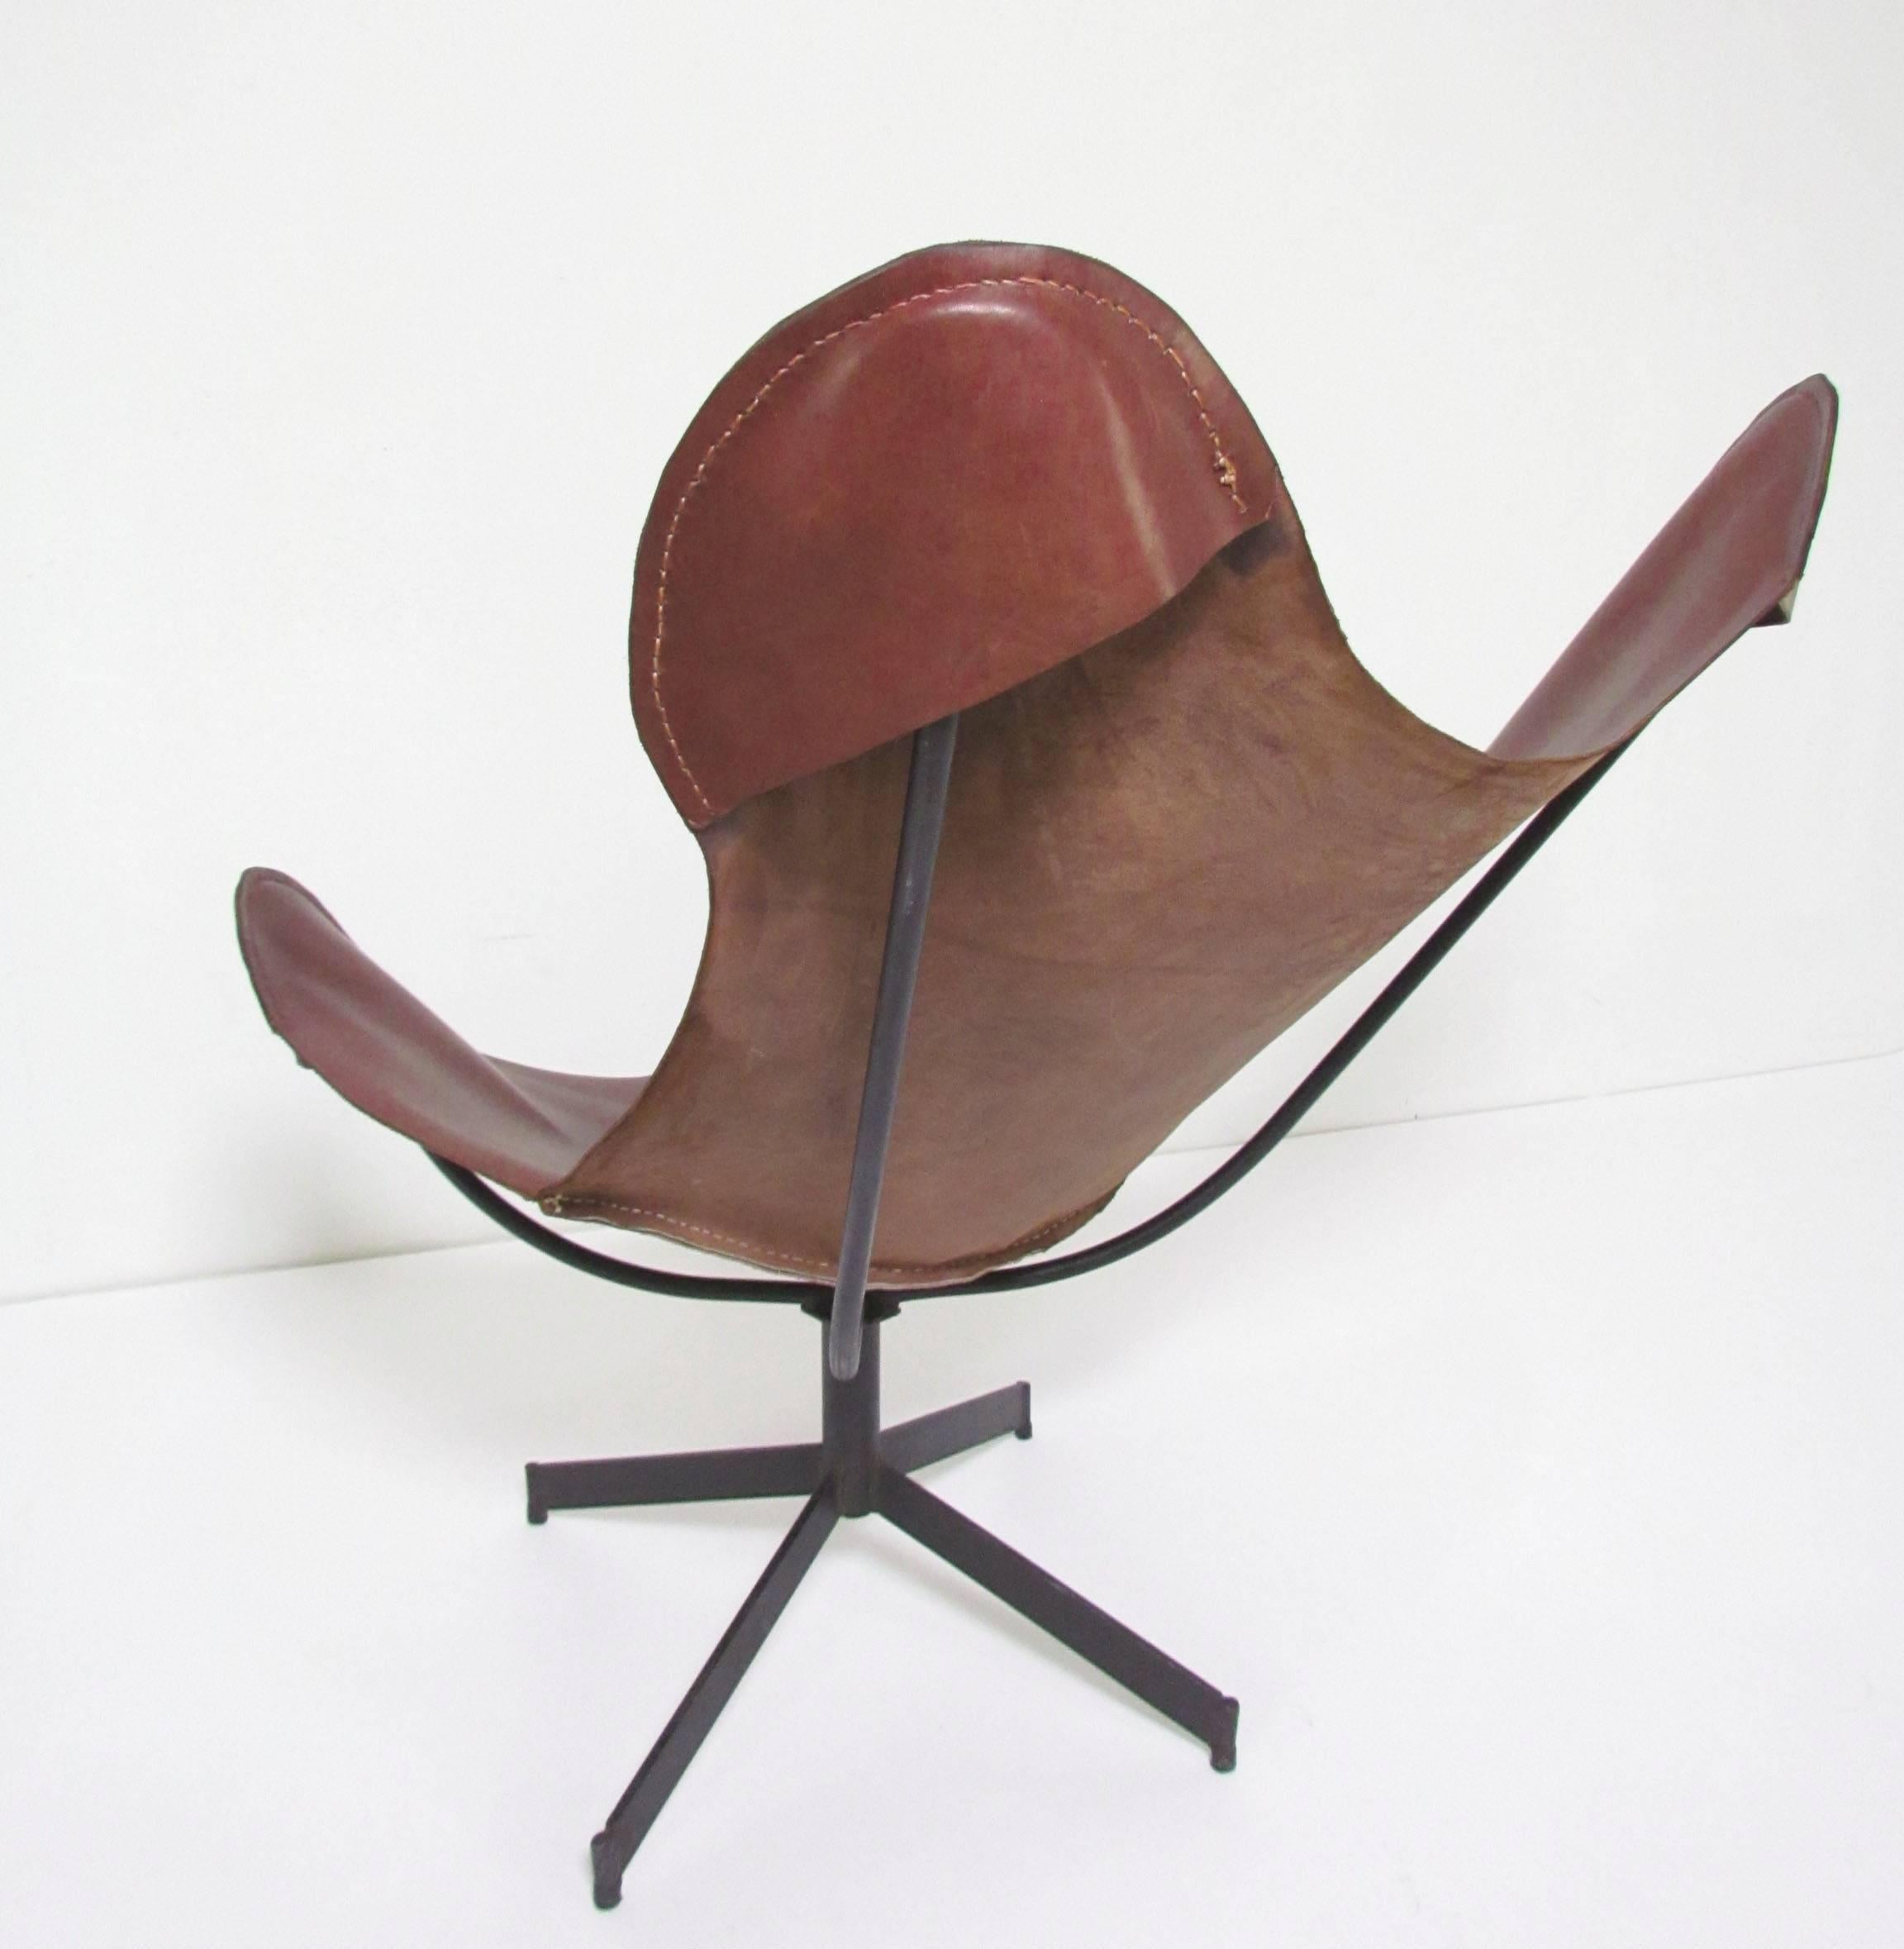 Mid-20th Century Swivel Leather Sling Lounge Chair by Leathercrafter, New York, circa 1960s